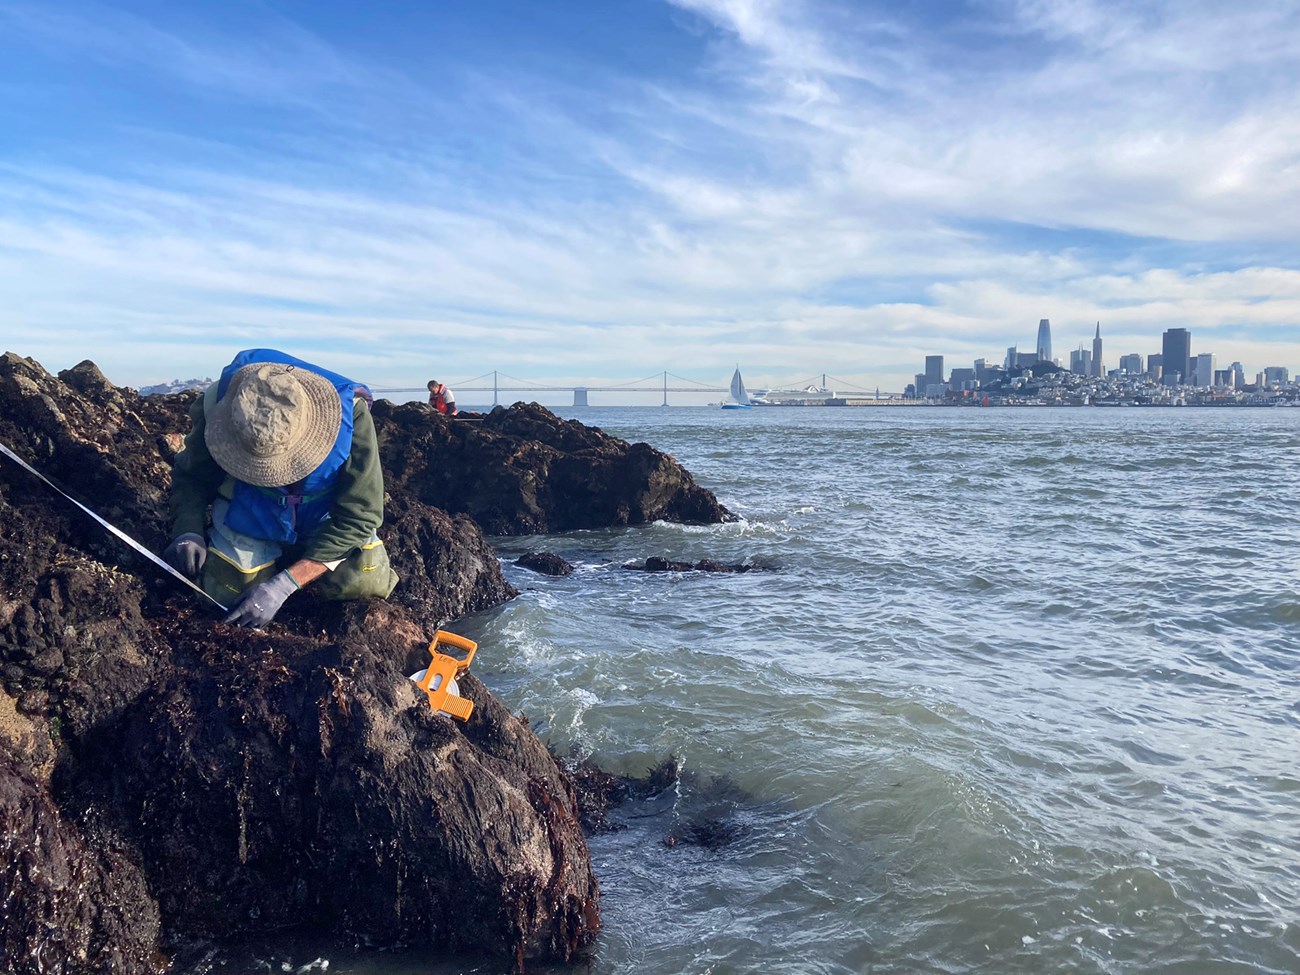 Person placing a measuring tape on an algae-covered rocky shelf just above the churning water of San Francisco Bay. The Bay Bridge and the San Francisco skyline are in the background.